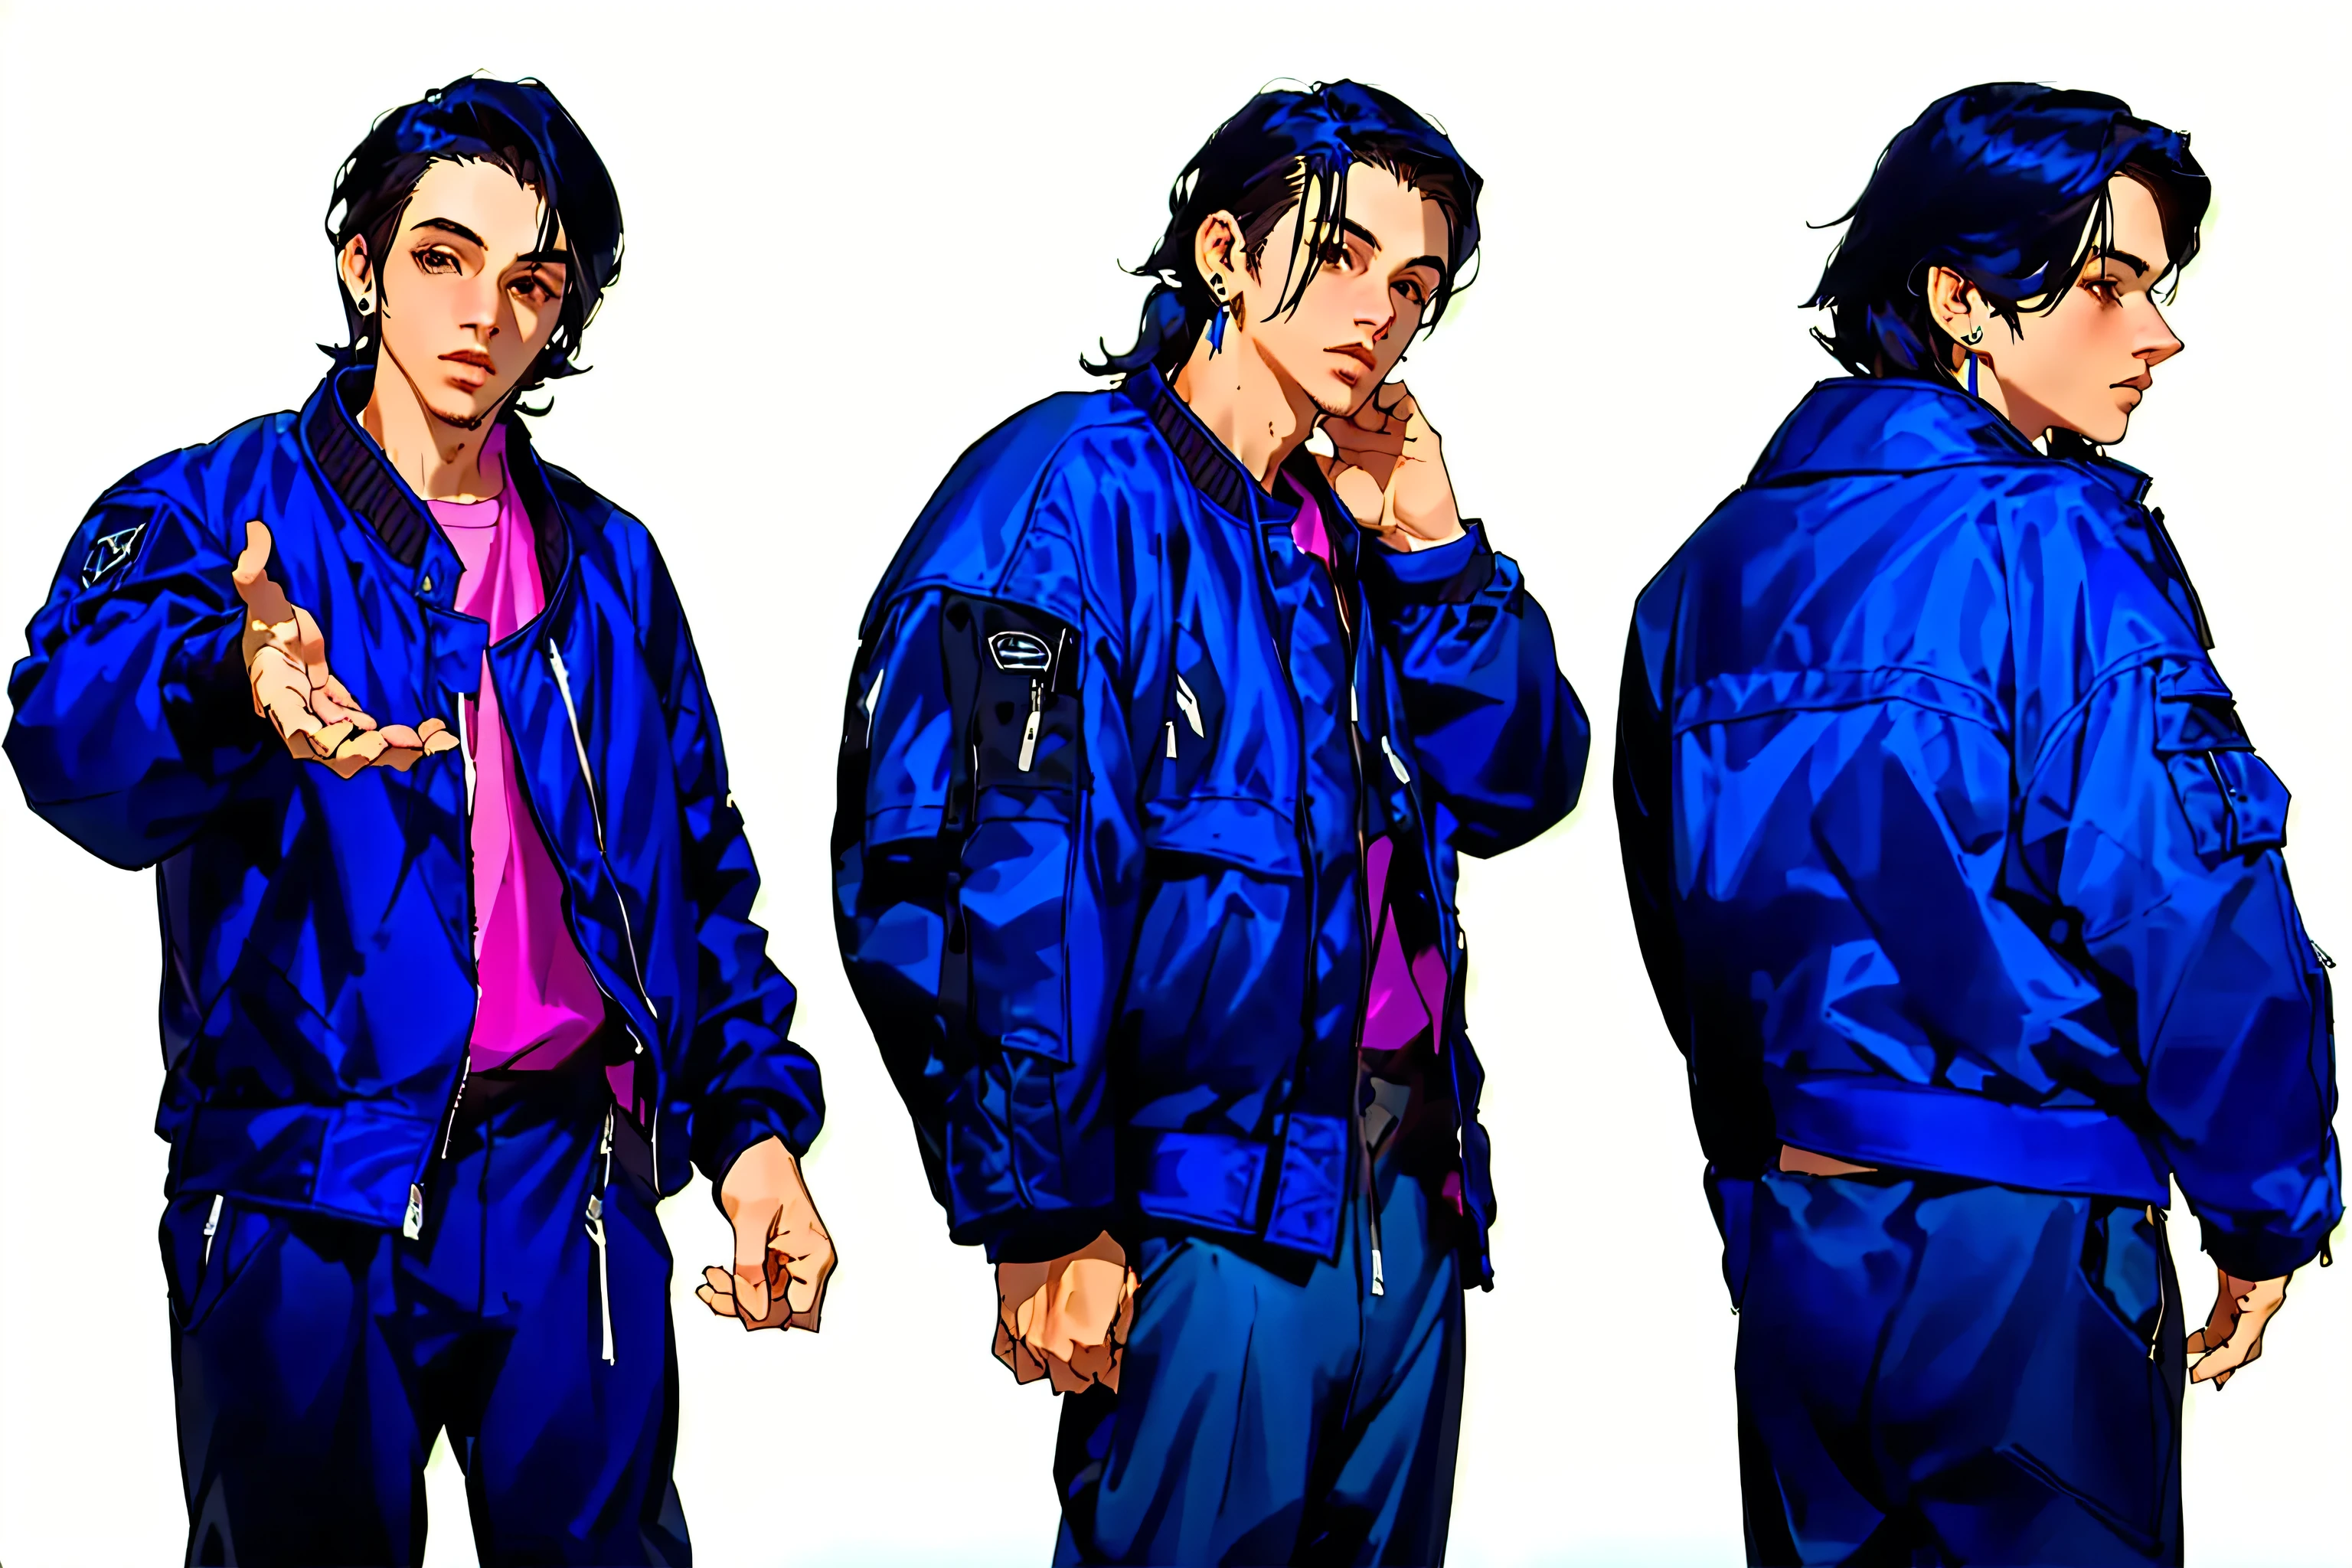 reference sheet, matching outfits, (character design, front angle, side angle, rear angle) qaiwachgan face, beautiful final fantasy male, man in a purple black jacket, wearing a bomber jacket, wearing an aviator jacket, Brown pants, full body close-up shot, wearing ripped flight suit, close up half body shot, egocentric boy pose, main character, handsome, black hair, brown eyes, western, VERY HANDSOME, age 25, perfect lips, perfect hands, ear dangle earring, alpha male type, short black hair, standing against a plain white wall, purple final fantasy cinematic lightning, professional lighting, sunbeam, bokeh, dramatic lighting,